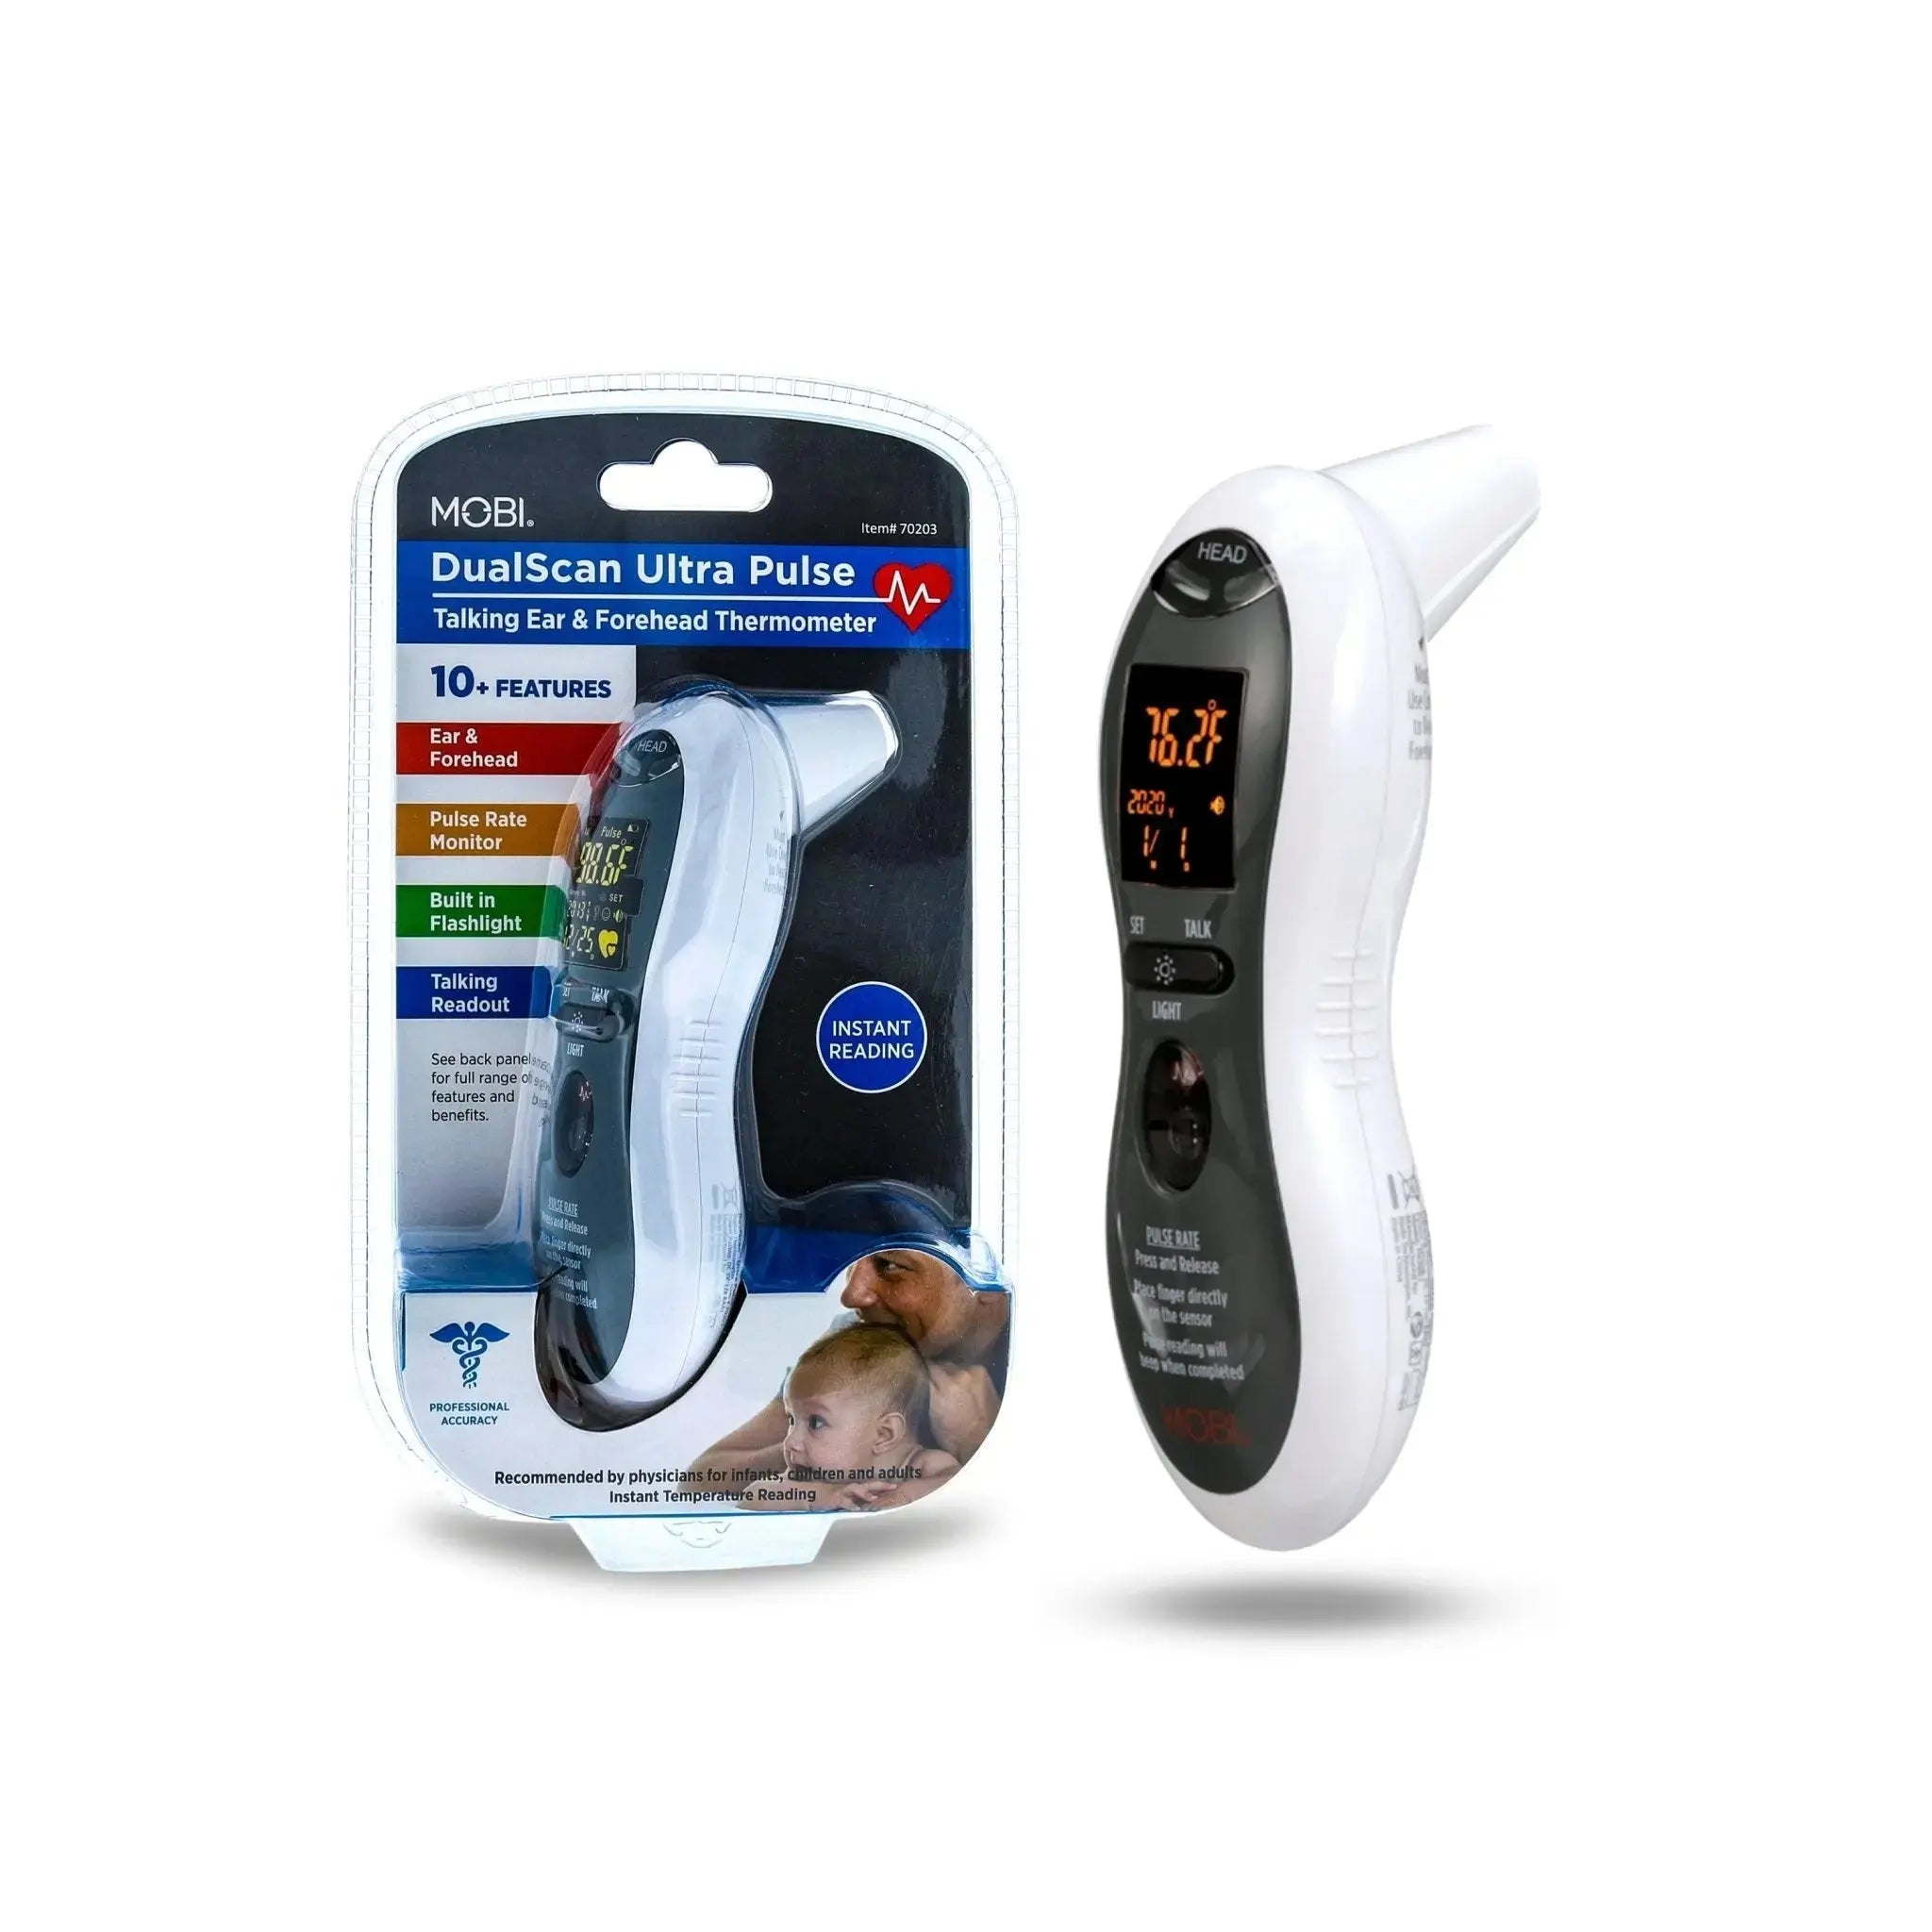 http://mobiusa.com/cdn/shop/files/DualScan-Ultra-Pulse-Talking-Ear-_-Forehead-Thermometer-with-10_-Features-Mobi-1691791725311.jpg?v=1691791727&width=2048